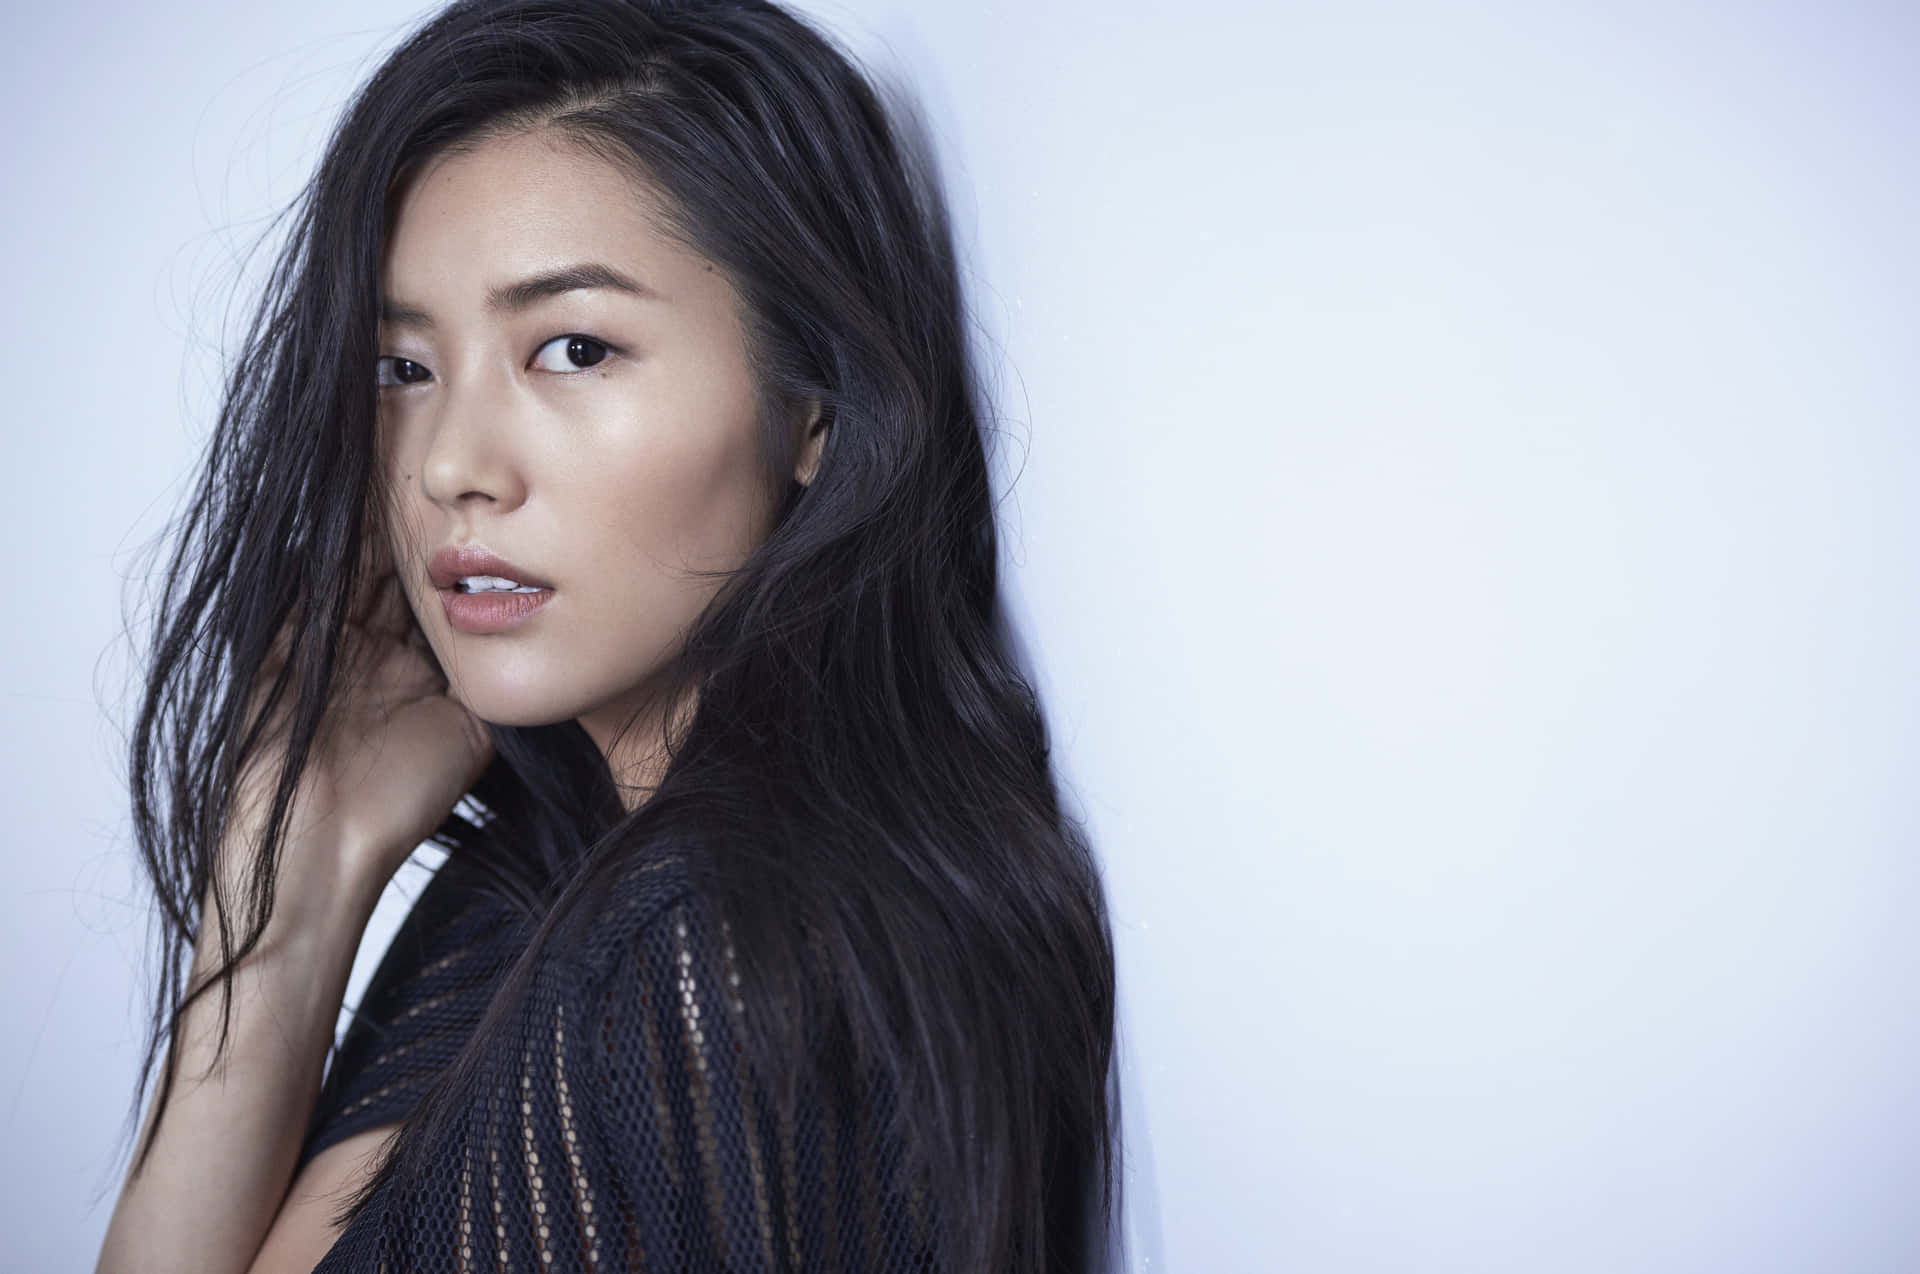 Chinese Supermodel Liu Wen Radiating Confidence In A Chic And Stylish Dress Wallpaper